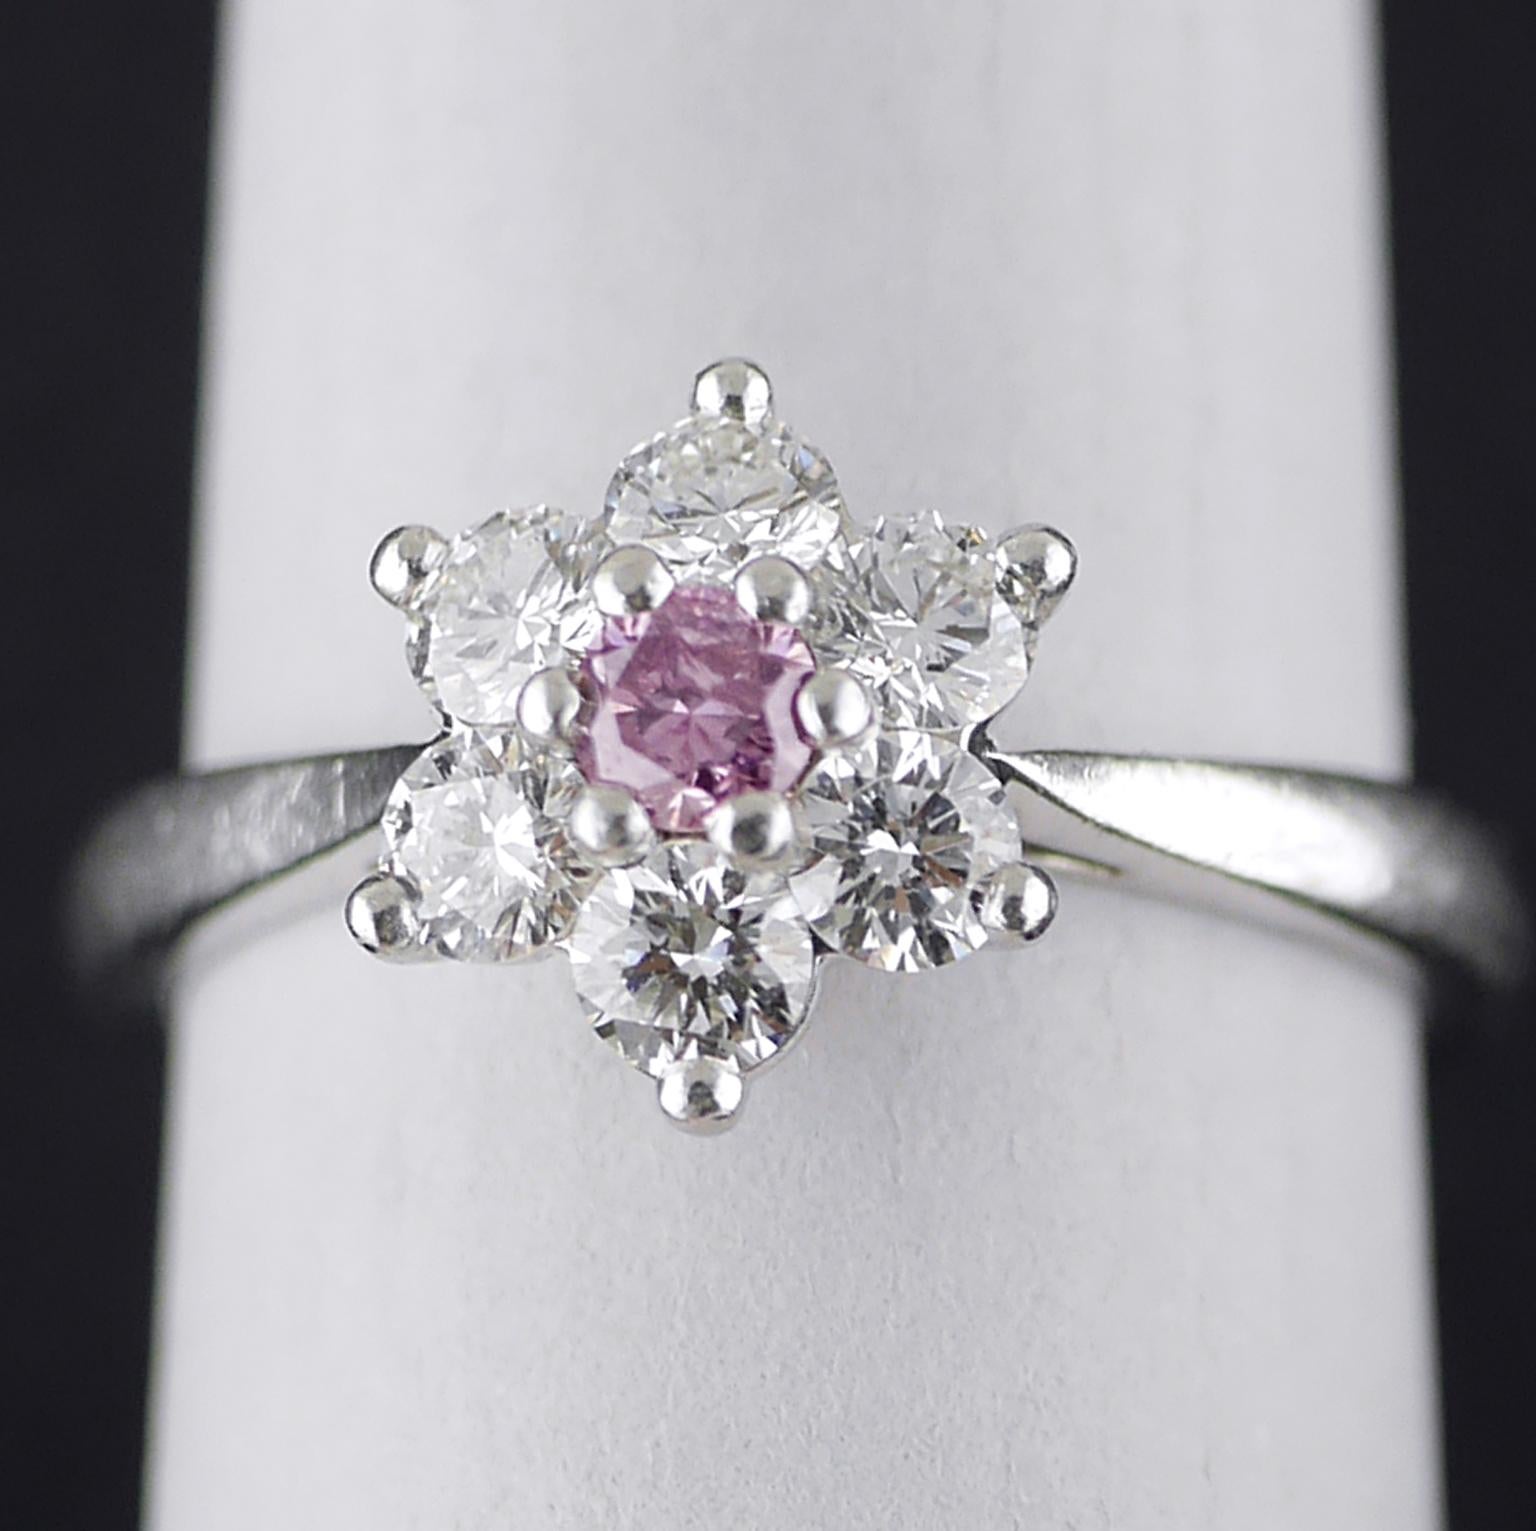 Certified natural colour fancy purple round brilliant cut and white diamond cluster ring, 2010.

0.13ct Brilliant cut central diamond, light purple colour with a pinkish hue, surrounded by 6 white diamonds (0.60ct, F/G, Vs1 approx) set in a Platinum